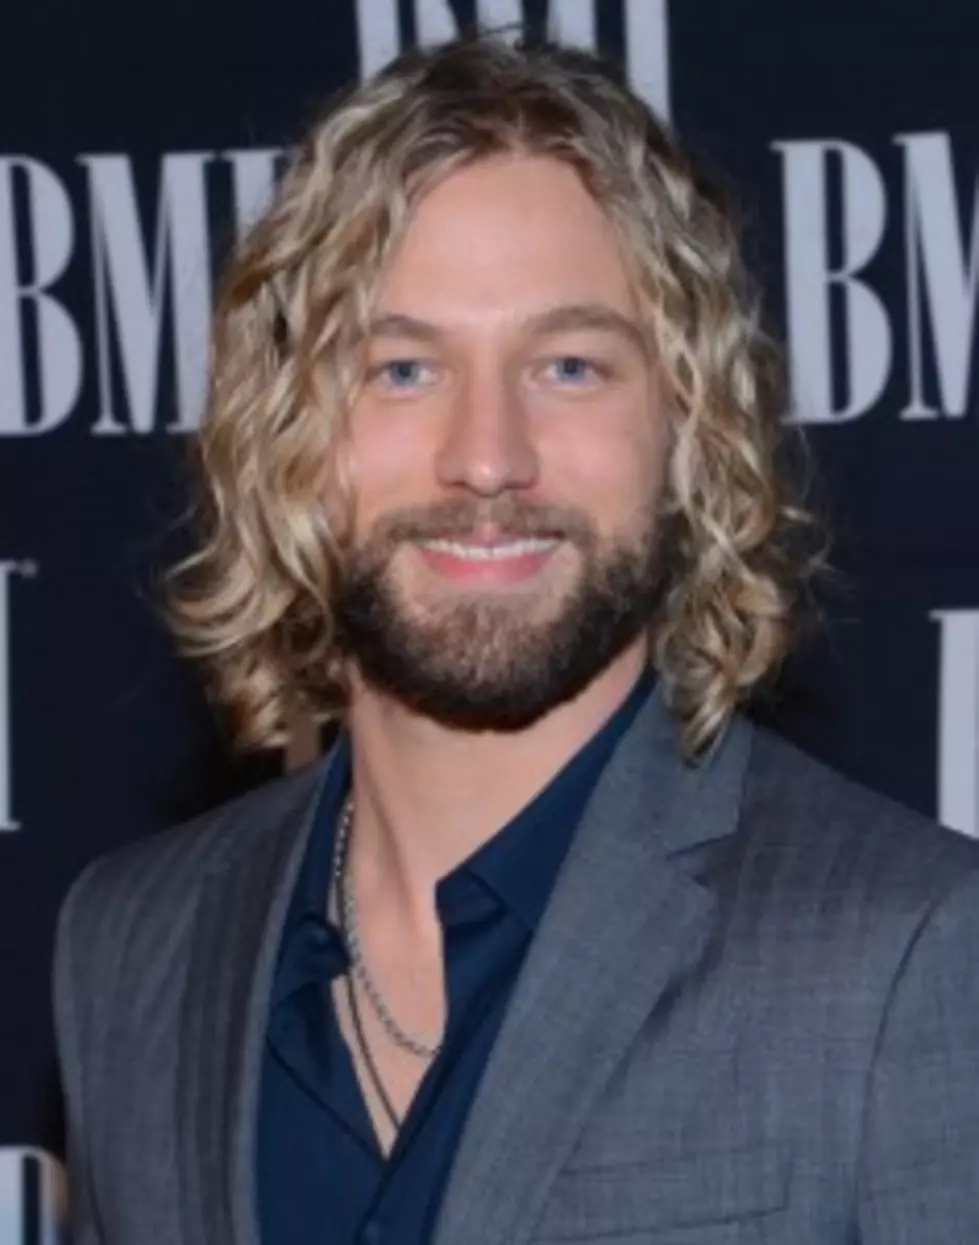 Casey James Gives Some Travel Tips And Chats About His Favorite Airport